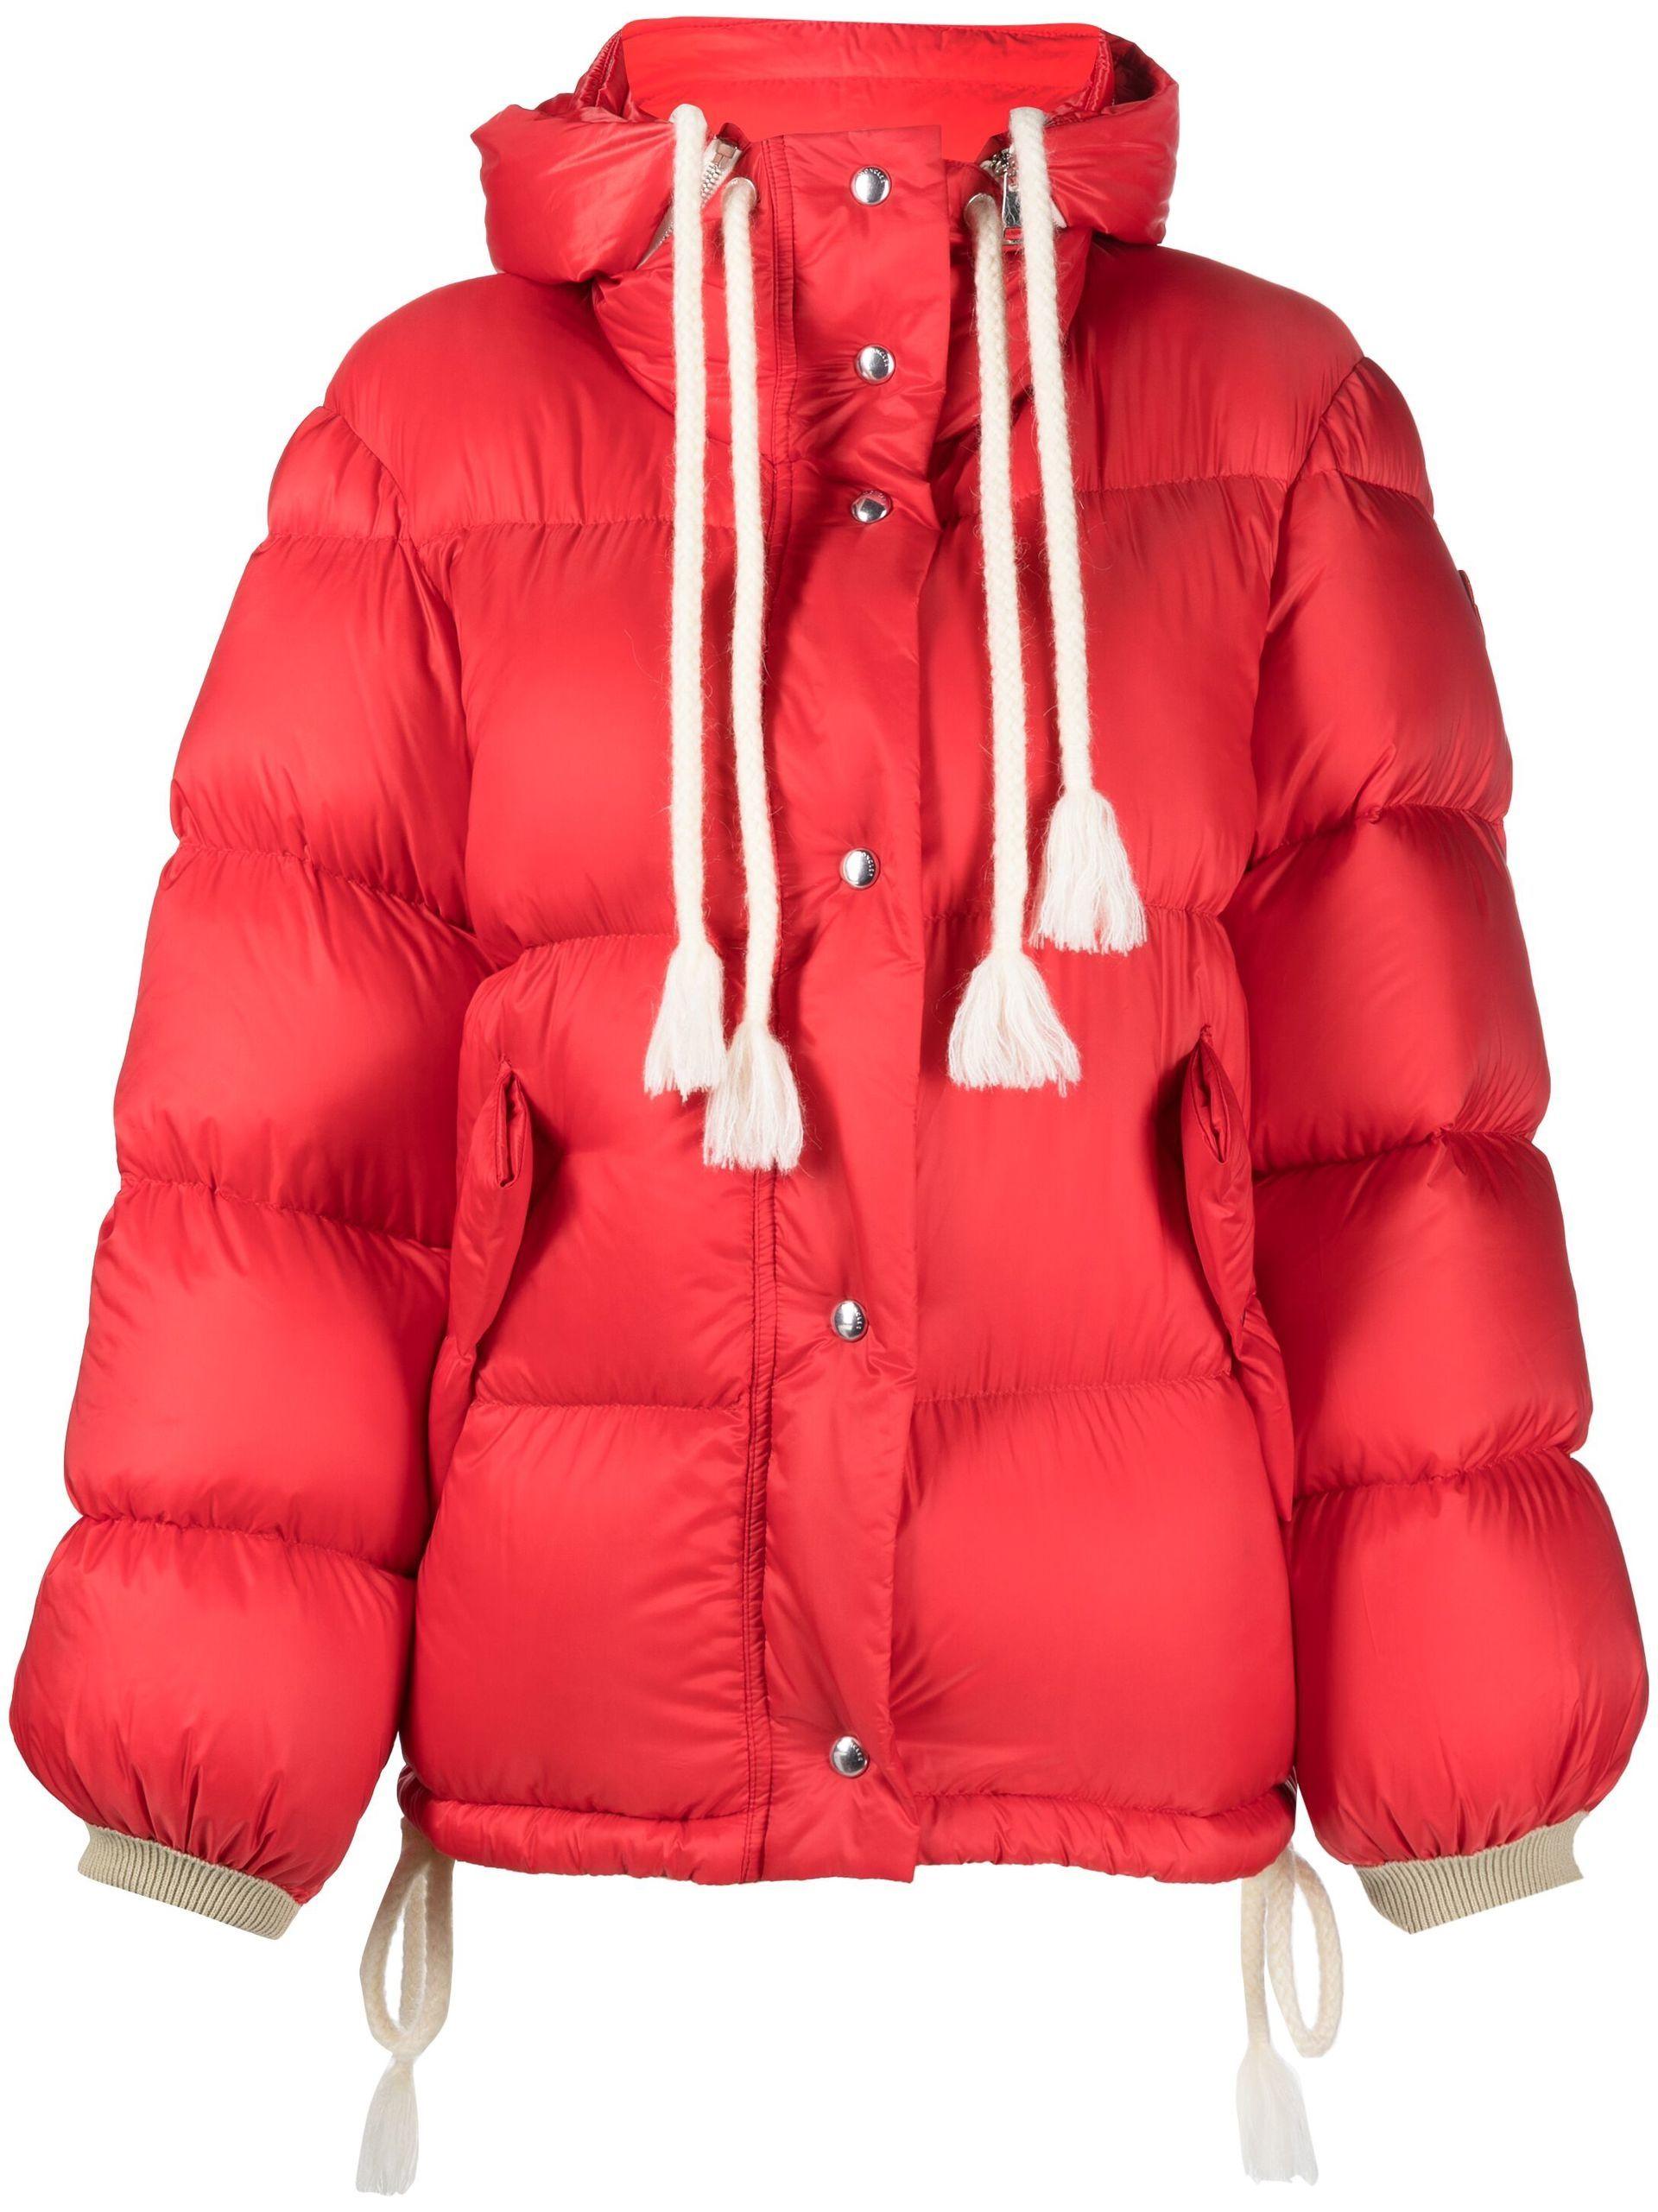 Moncler Genius 1952 Sydow Puffer Jacket in Red | Lyst UK